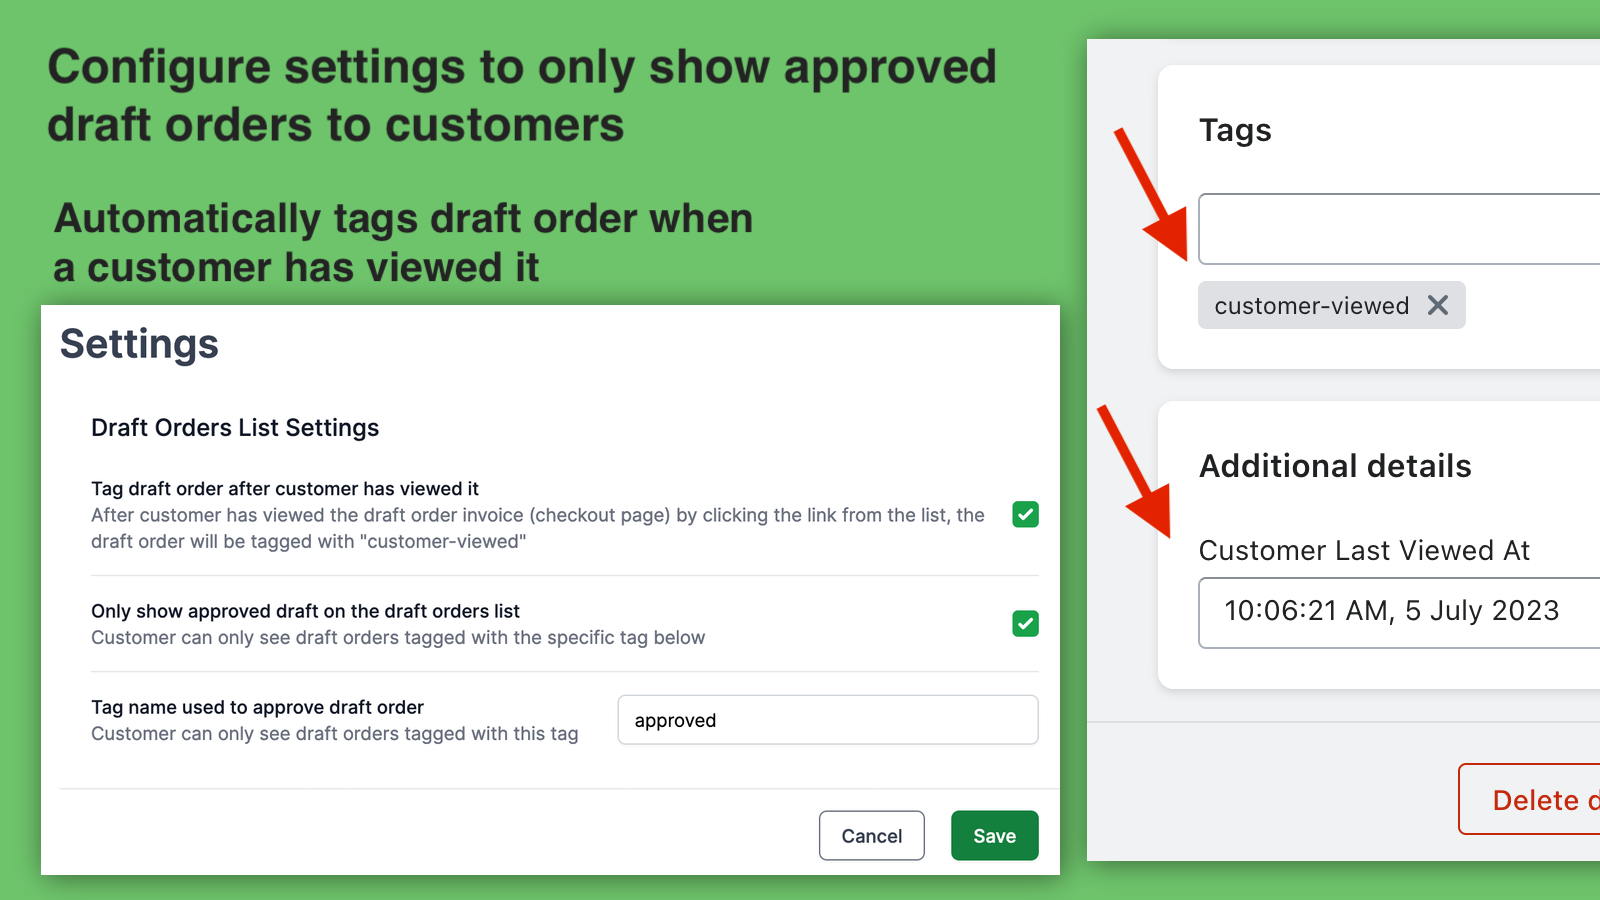 Configure to only show approved draft order, and tag draft order